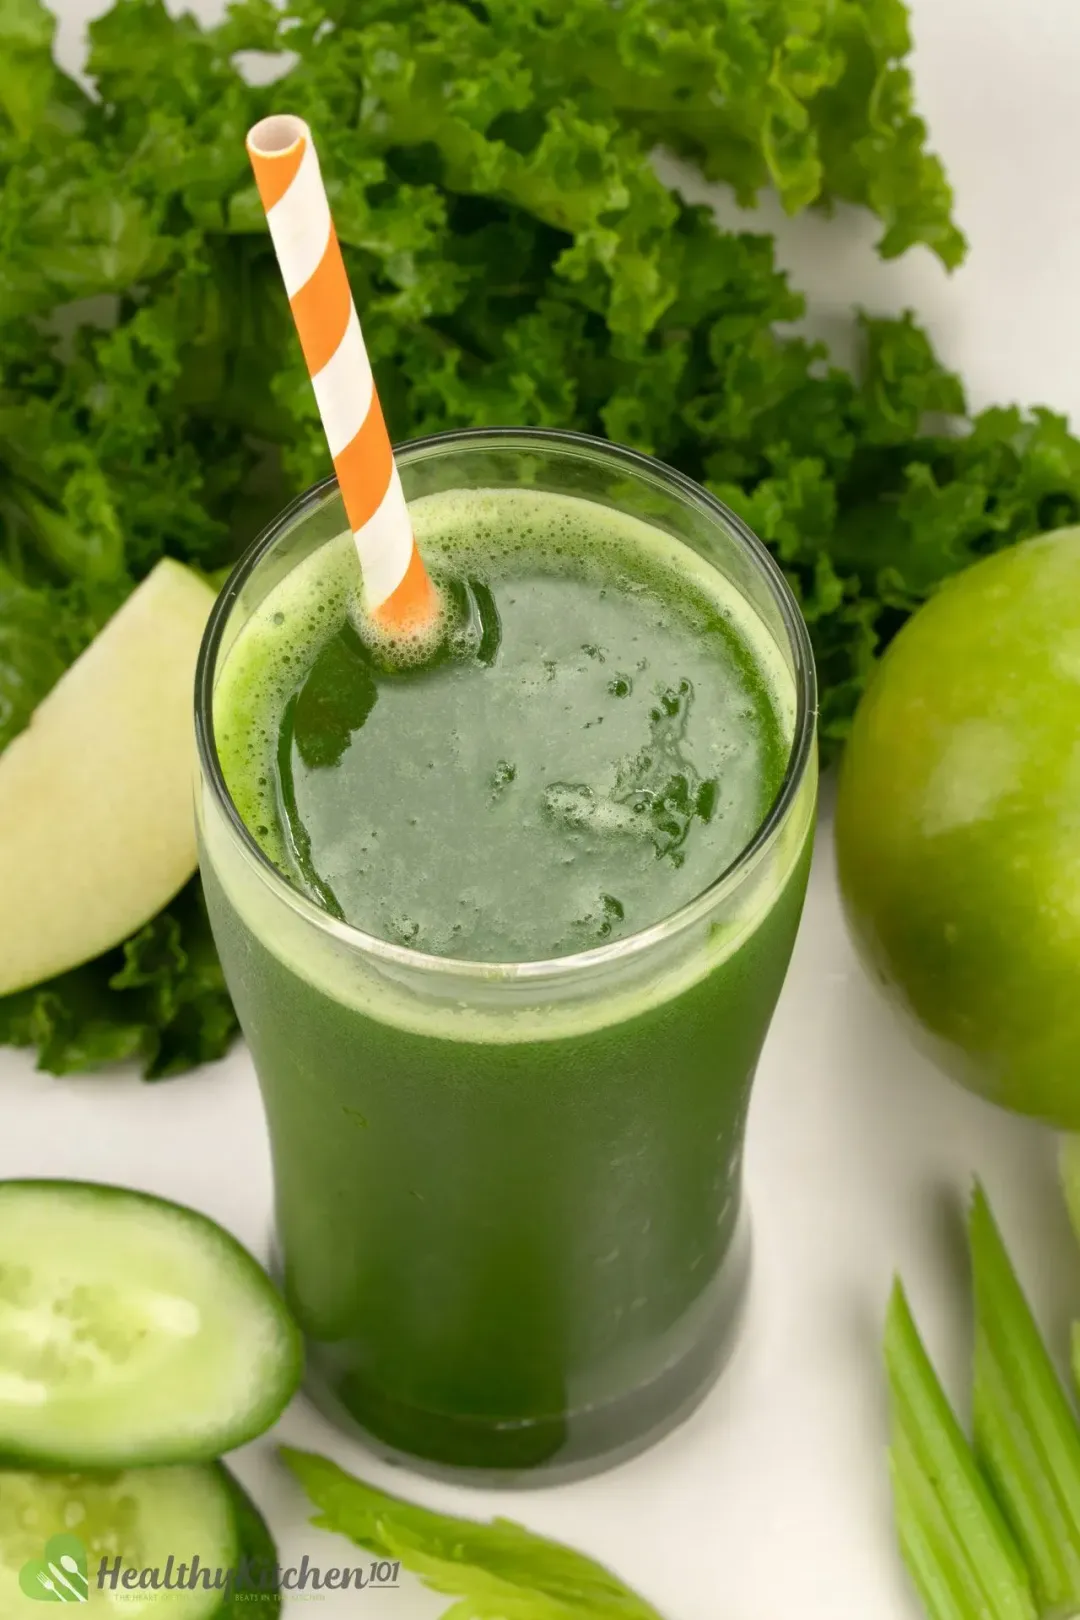 A glass of green vegetable juice whose picture is taken from above, with an orange straw dunked in and green fruits and vegetables in the background